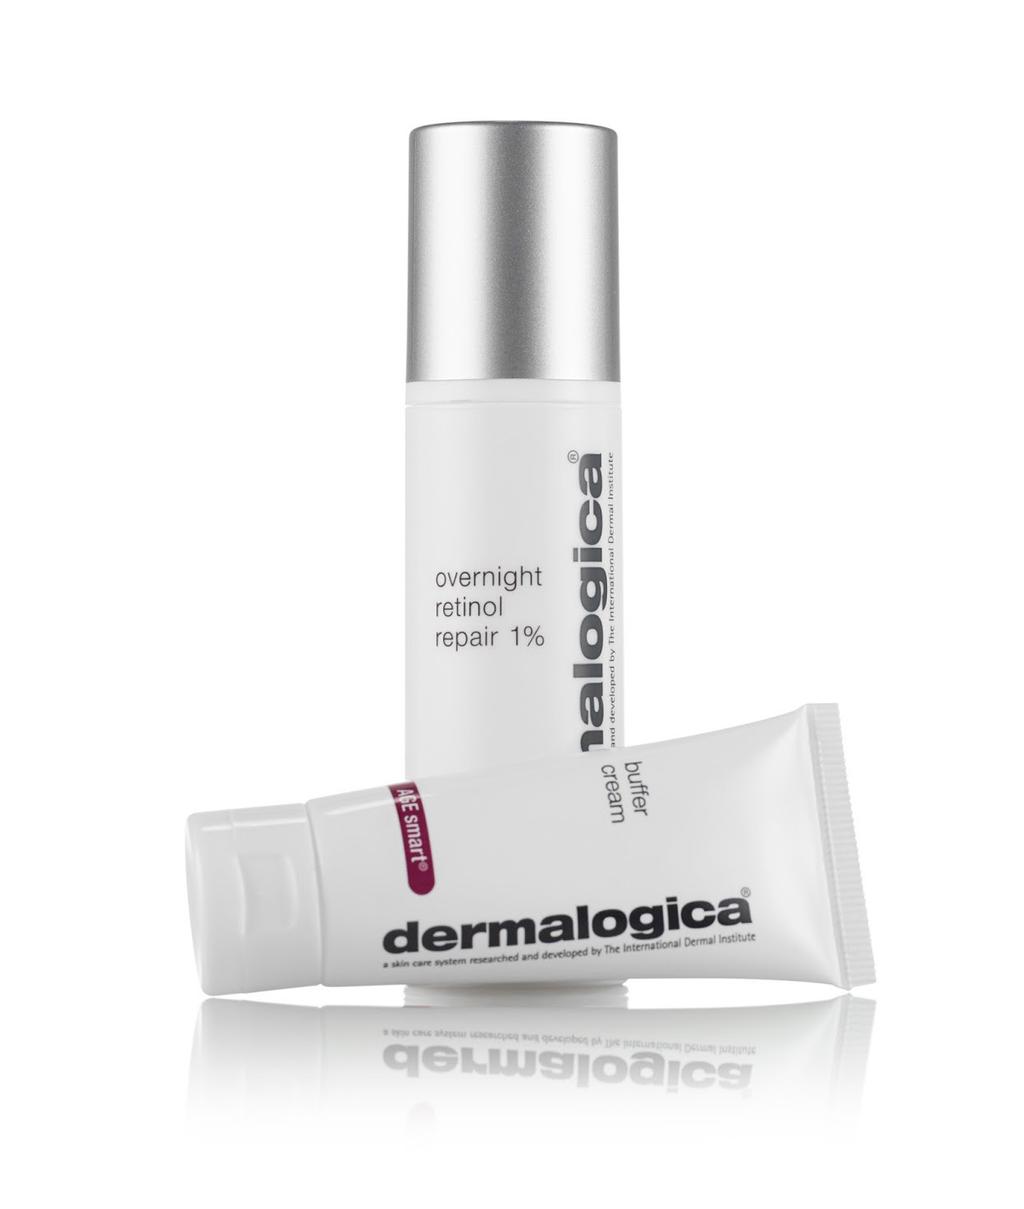 SKIN Dermalogica Skin Treatments Dermalogica Skin Treatments are unlike anything else in the industry.